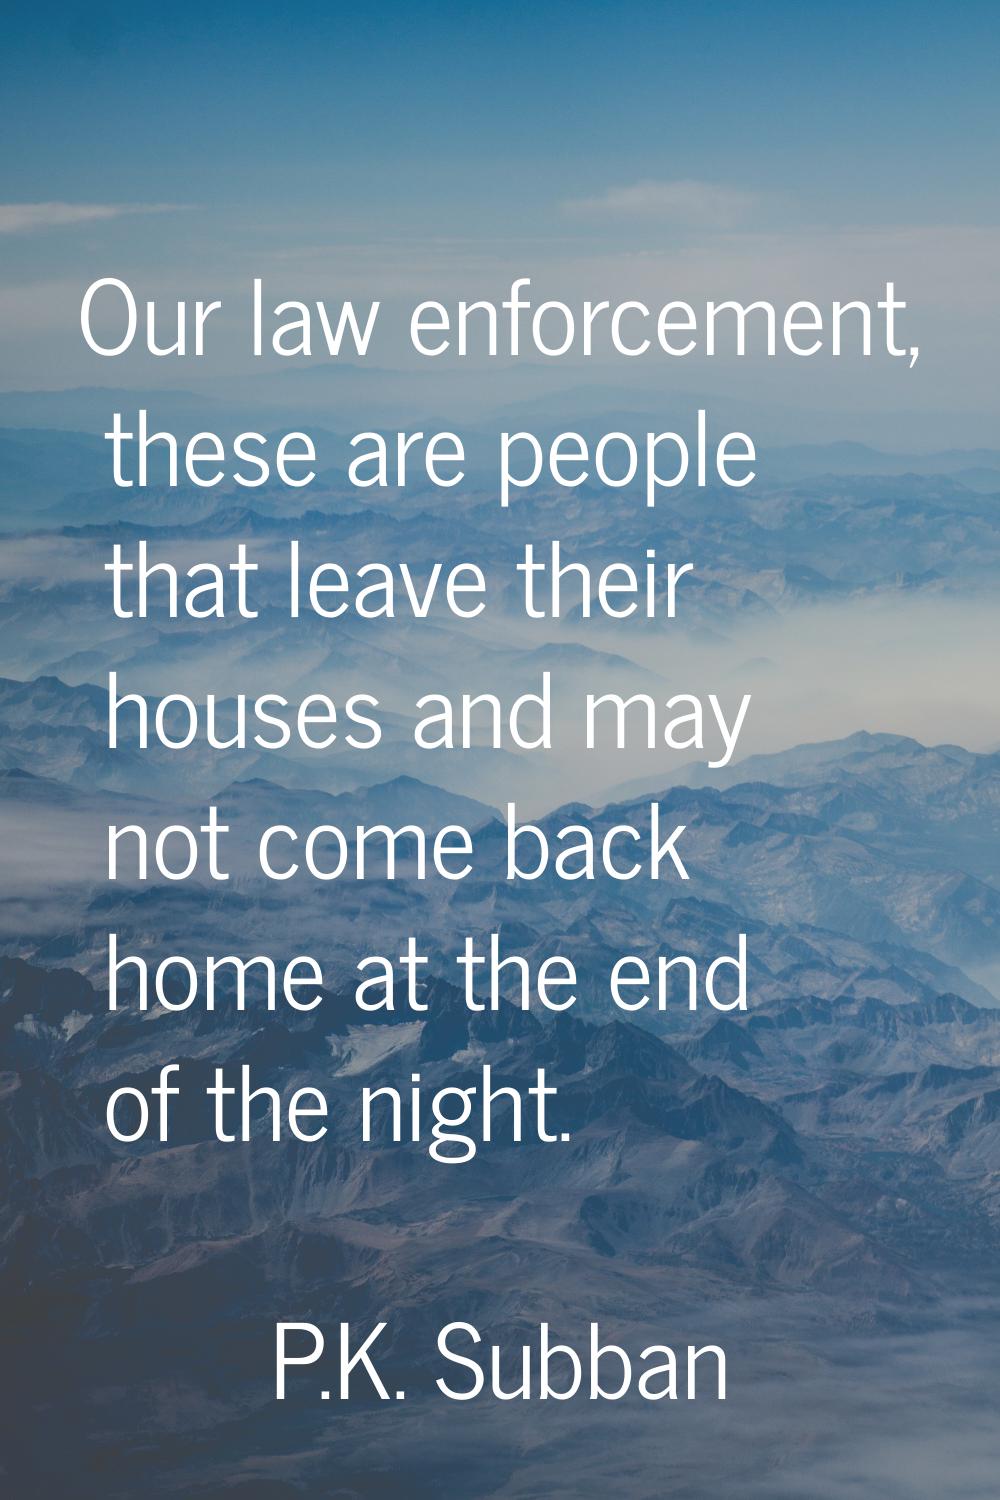 Our law enforcement, these are people that leave their houses and may not come back home at the end